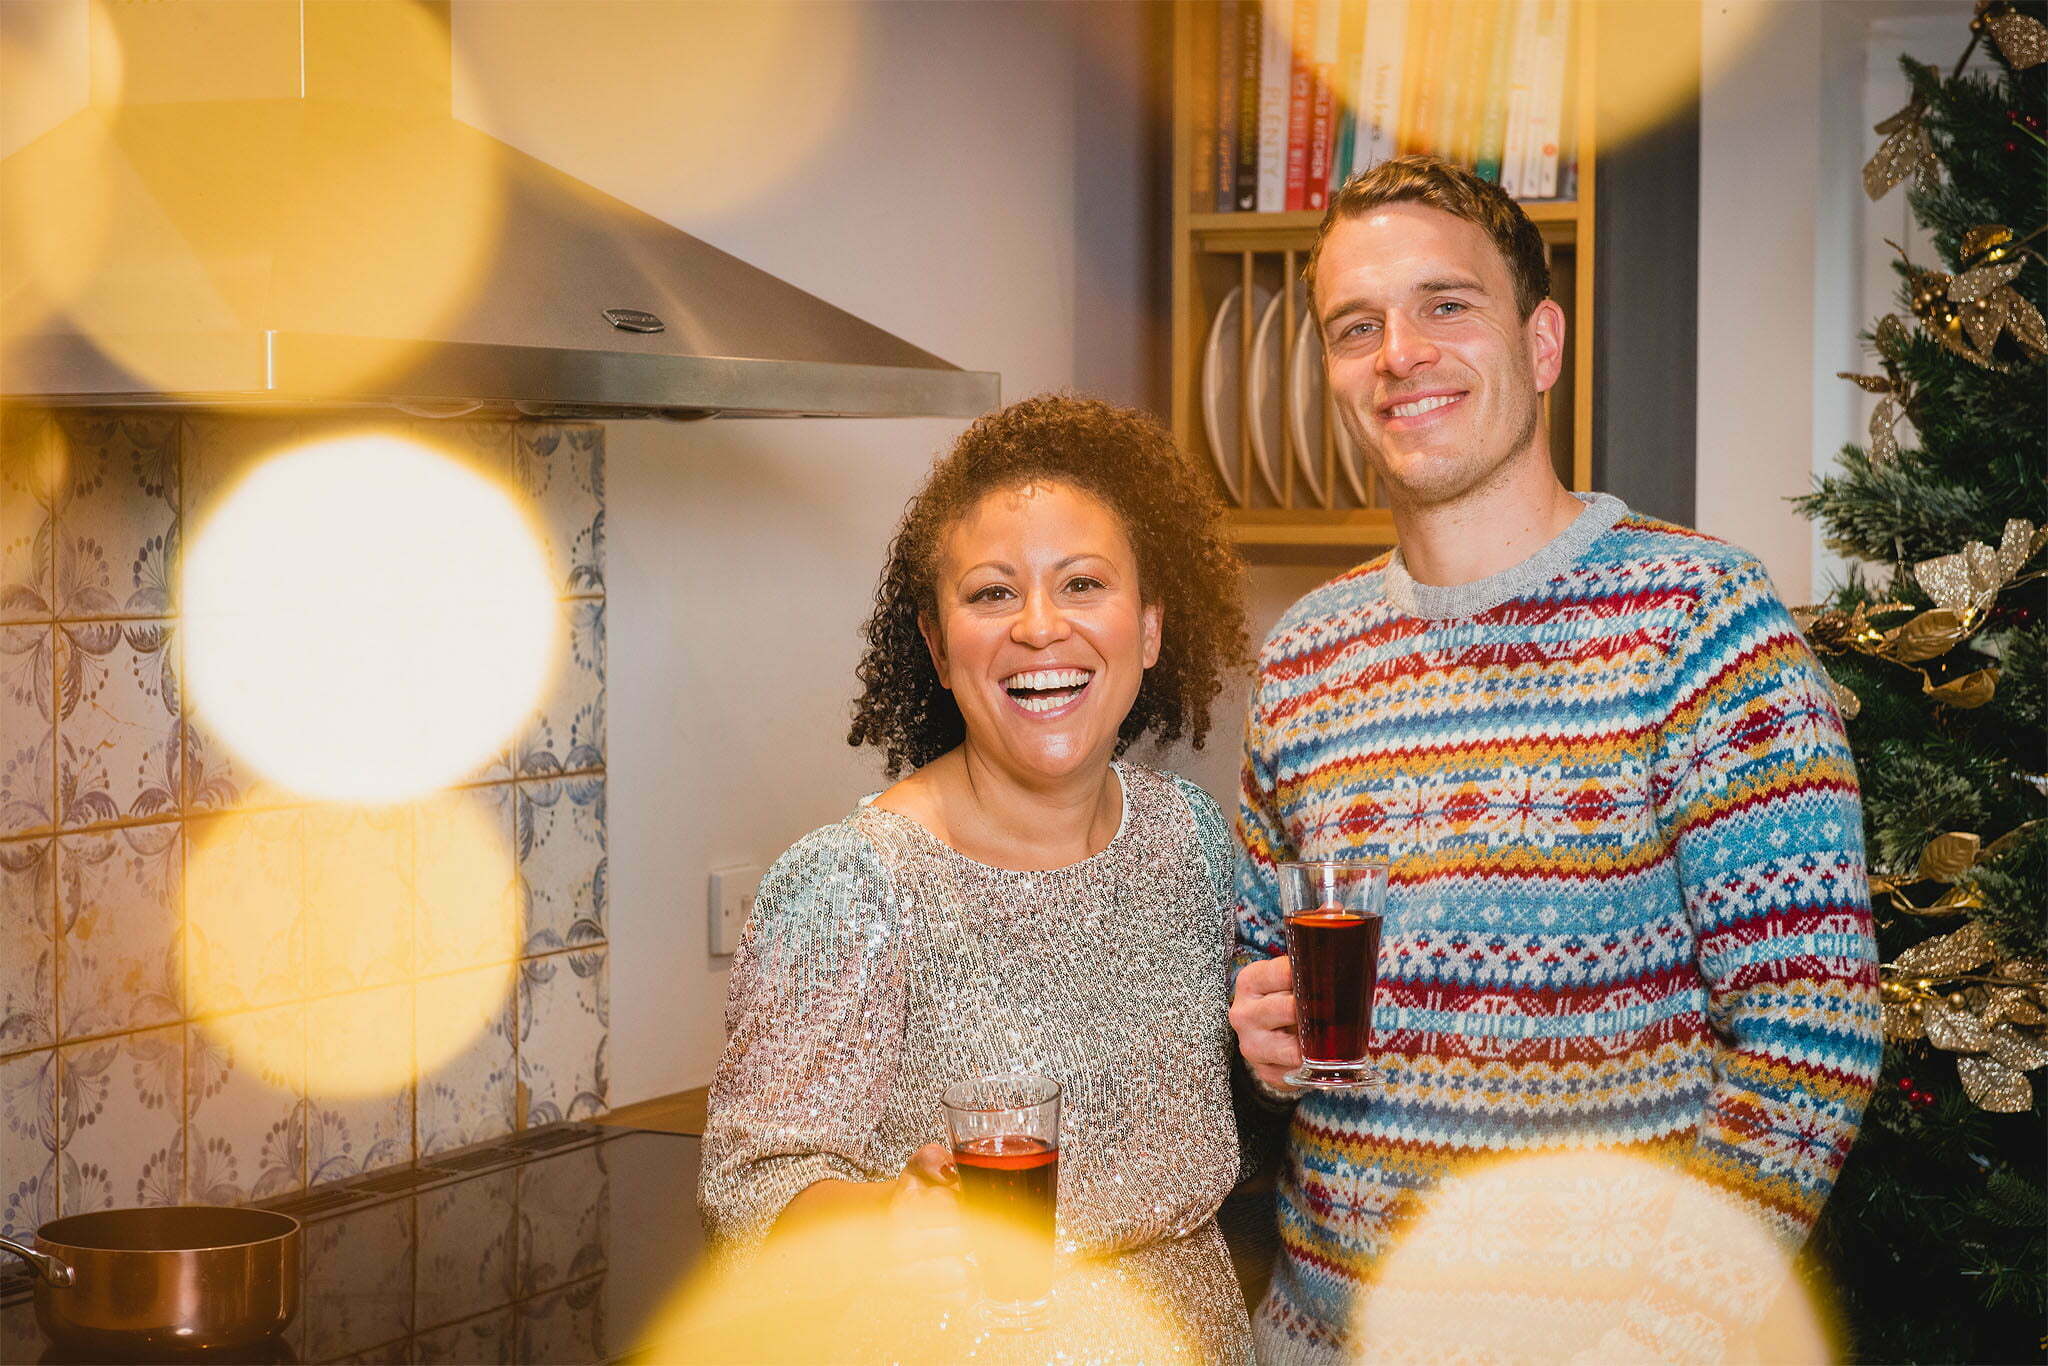 Luke and Charlotte are in their kitchen with a festive mise en scene. Luke is wearing a Christmas jumper and Charlotte is wearing a sequin dress. They're both holding drinks and are smiling.